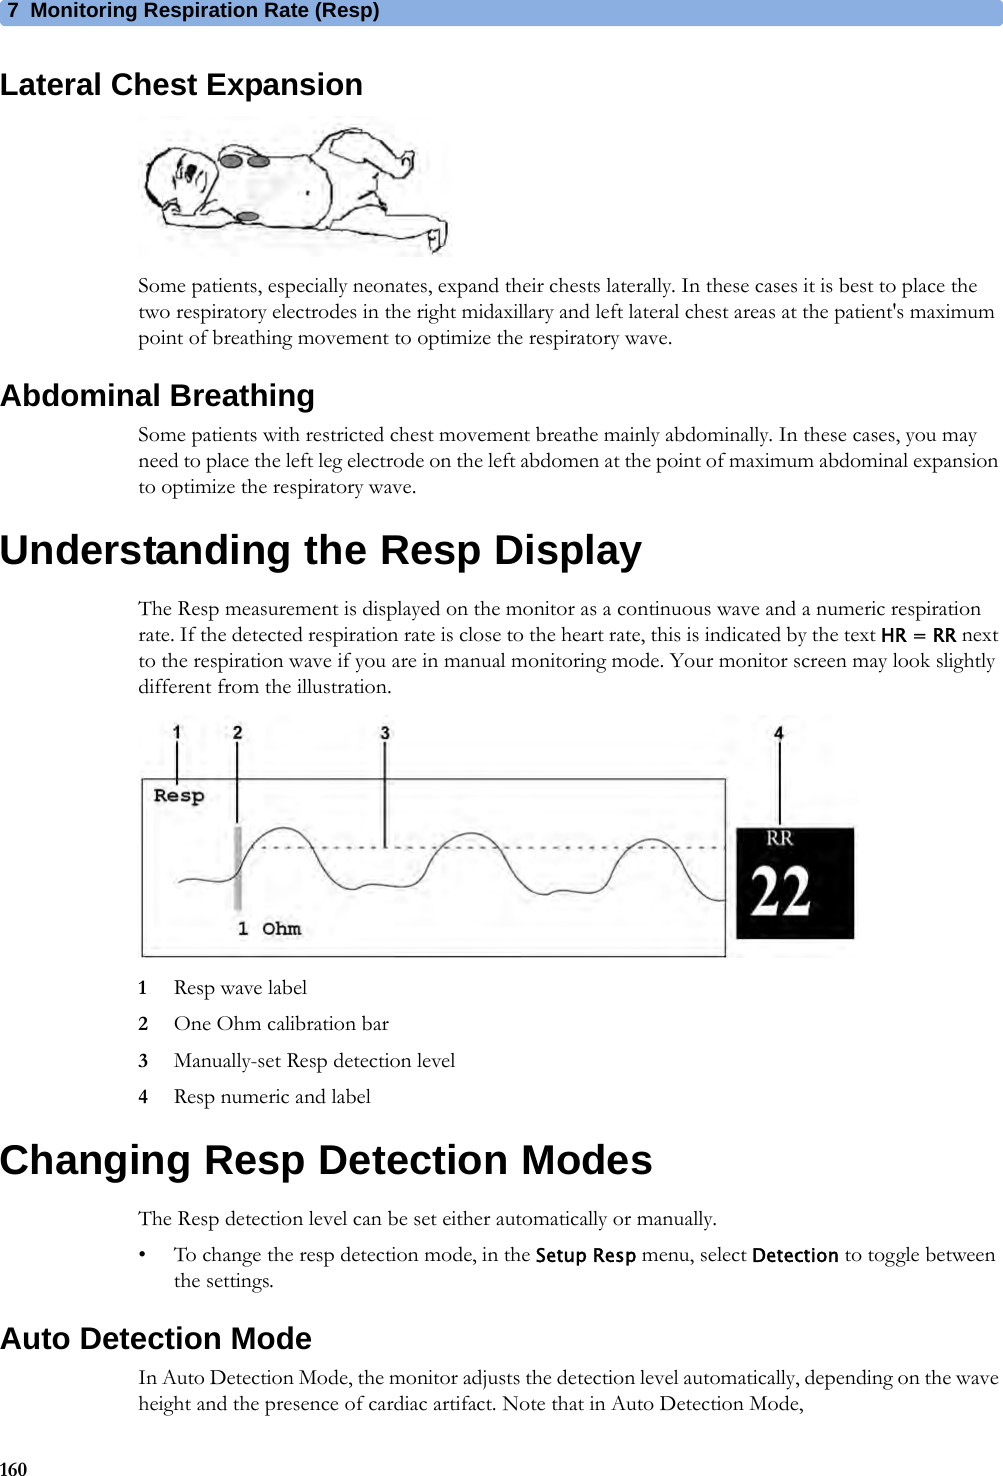 7 Monitoring Respiration Rate (Resp)160Lateral Chest ExpansionSome patients, especially neonates, expand their chests laterally. In these cases it is best to place the two respiratory electrodes in the right midaxillary and left lateral chest areas at the patient&apos;s maximum point of breathing movement to optimize the respiratory wave.Abdominal BreathingSome patients with restricted chest movement breathe mainly abdominally. In these cases, you may need to place the left leg electrode on the left abdomen at the point of maximum abdominal expansion to optimize the respiratory wave.Understanding the Resp DisplayThe Resp measurement is displayed on the monitor as a continuous wave and a numeric respiration rate. If the detected respiration rate is close to the heart rate, this is indicated by the text HR = RR next to the respiration wave if you are in manual monitoring mode. Your monitor screen may look slightly different from the illustration.1Resp wave label2One Ohm calibration bar3Manually-set Resp detection level4Resp numeric and labelChanging Resp Detection ModesThe Resp detection level can be set either automatically or manually.• To change the resp detection mode, in the Setup Resp menu, select Detection to toggle between the settings.Auto Detection ModeIn Auto Detection Mode, the monitor adjusts the detection level automatically, depending on the wave height and the presence of cardiac artifact. Note that in Auto Detection Mode,